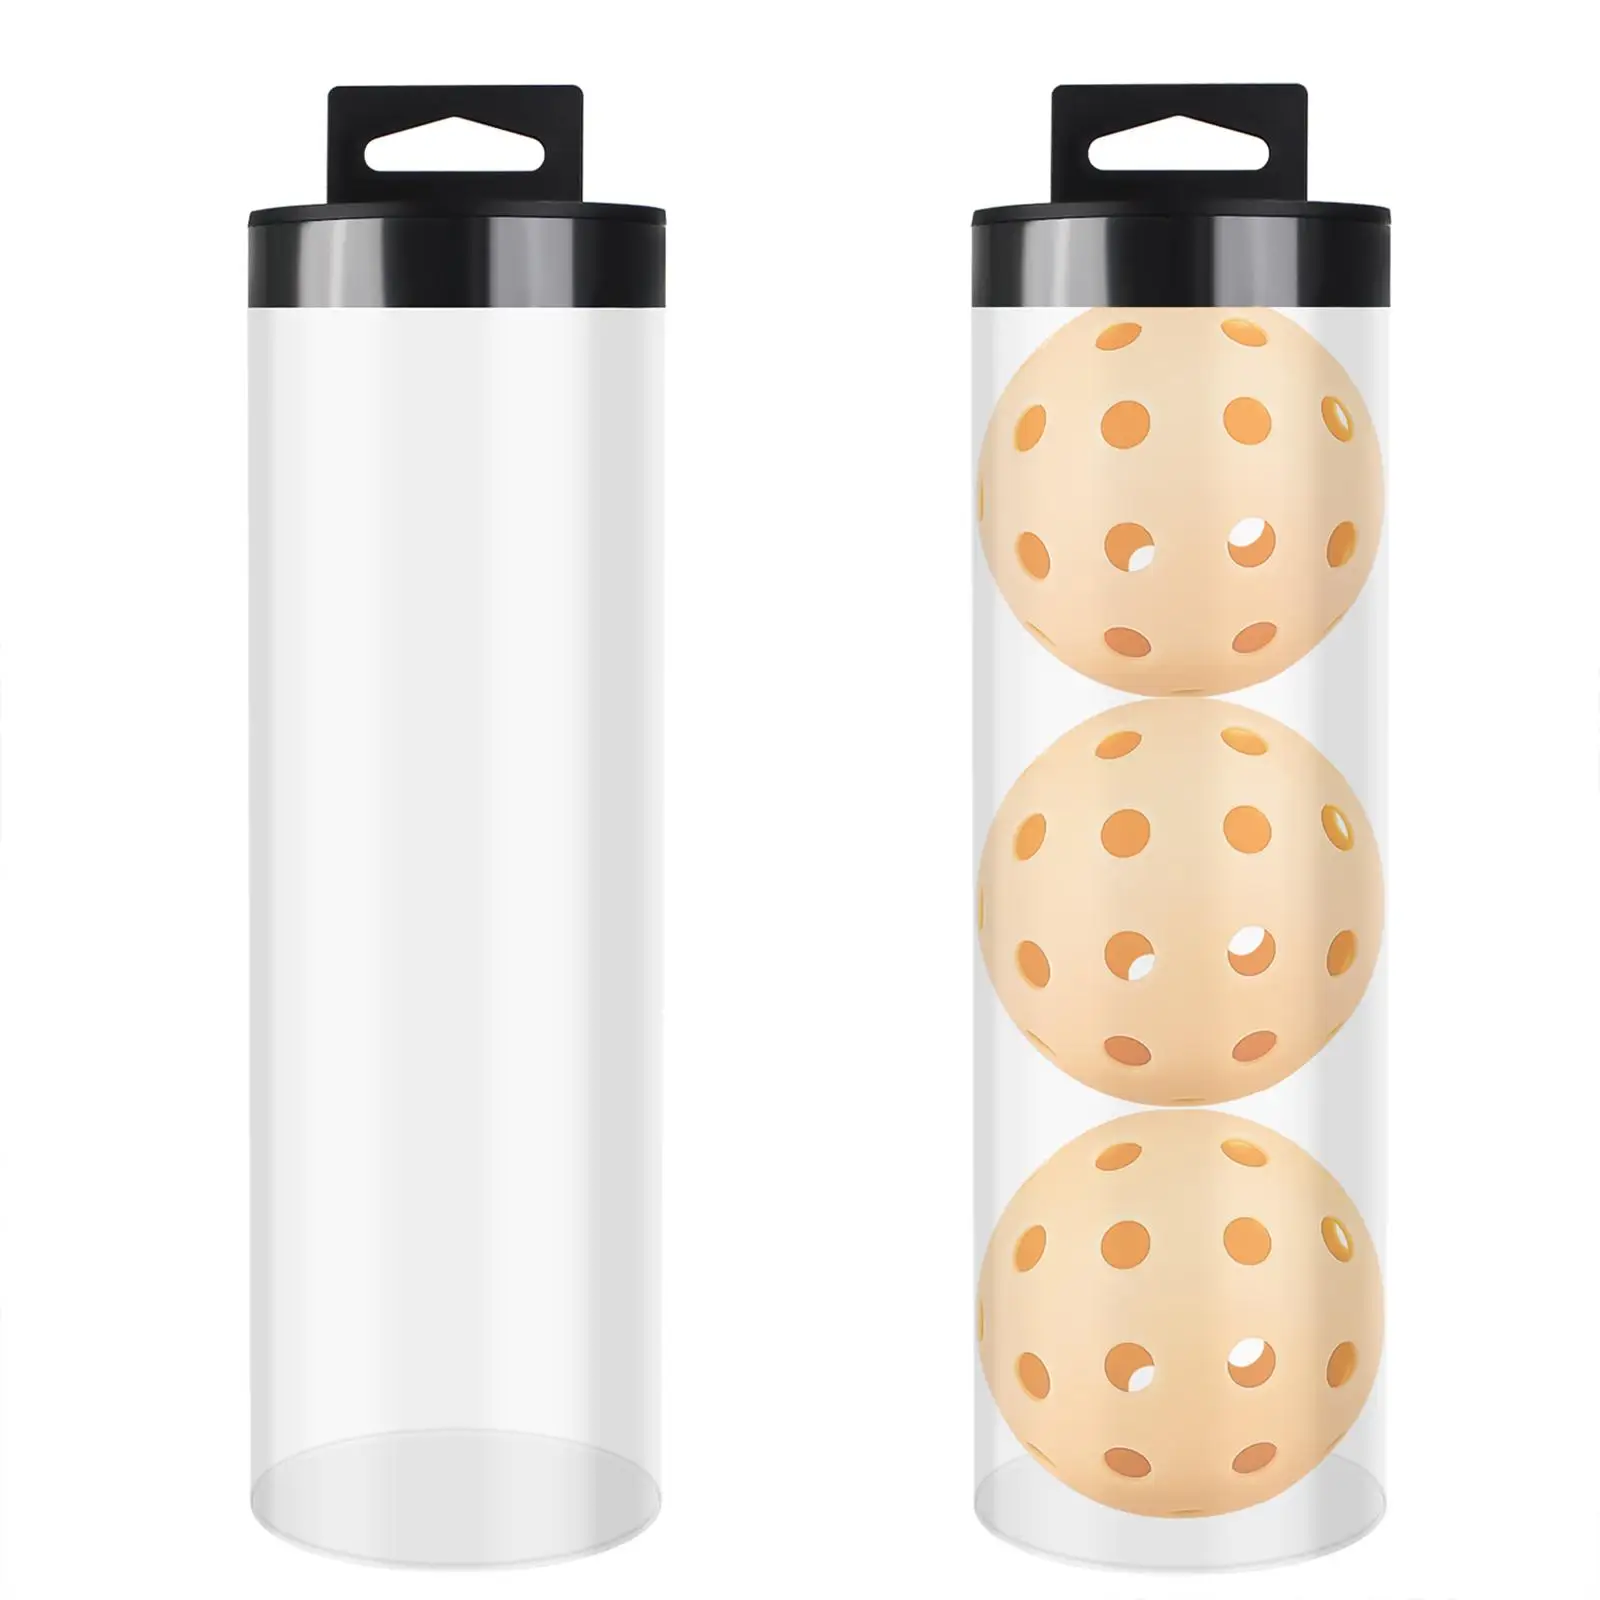 Tennis Ball Can Holder Portable Transparent Pickleball Canister Outdoor Ball Storage for Golf Training Practice Accessories